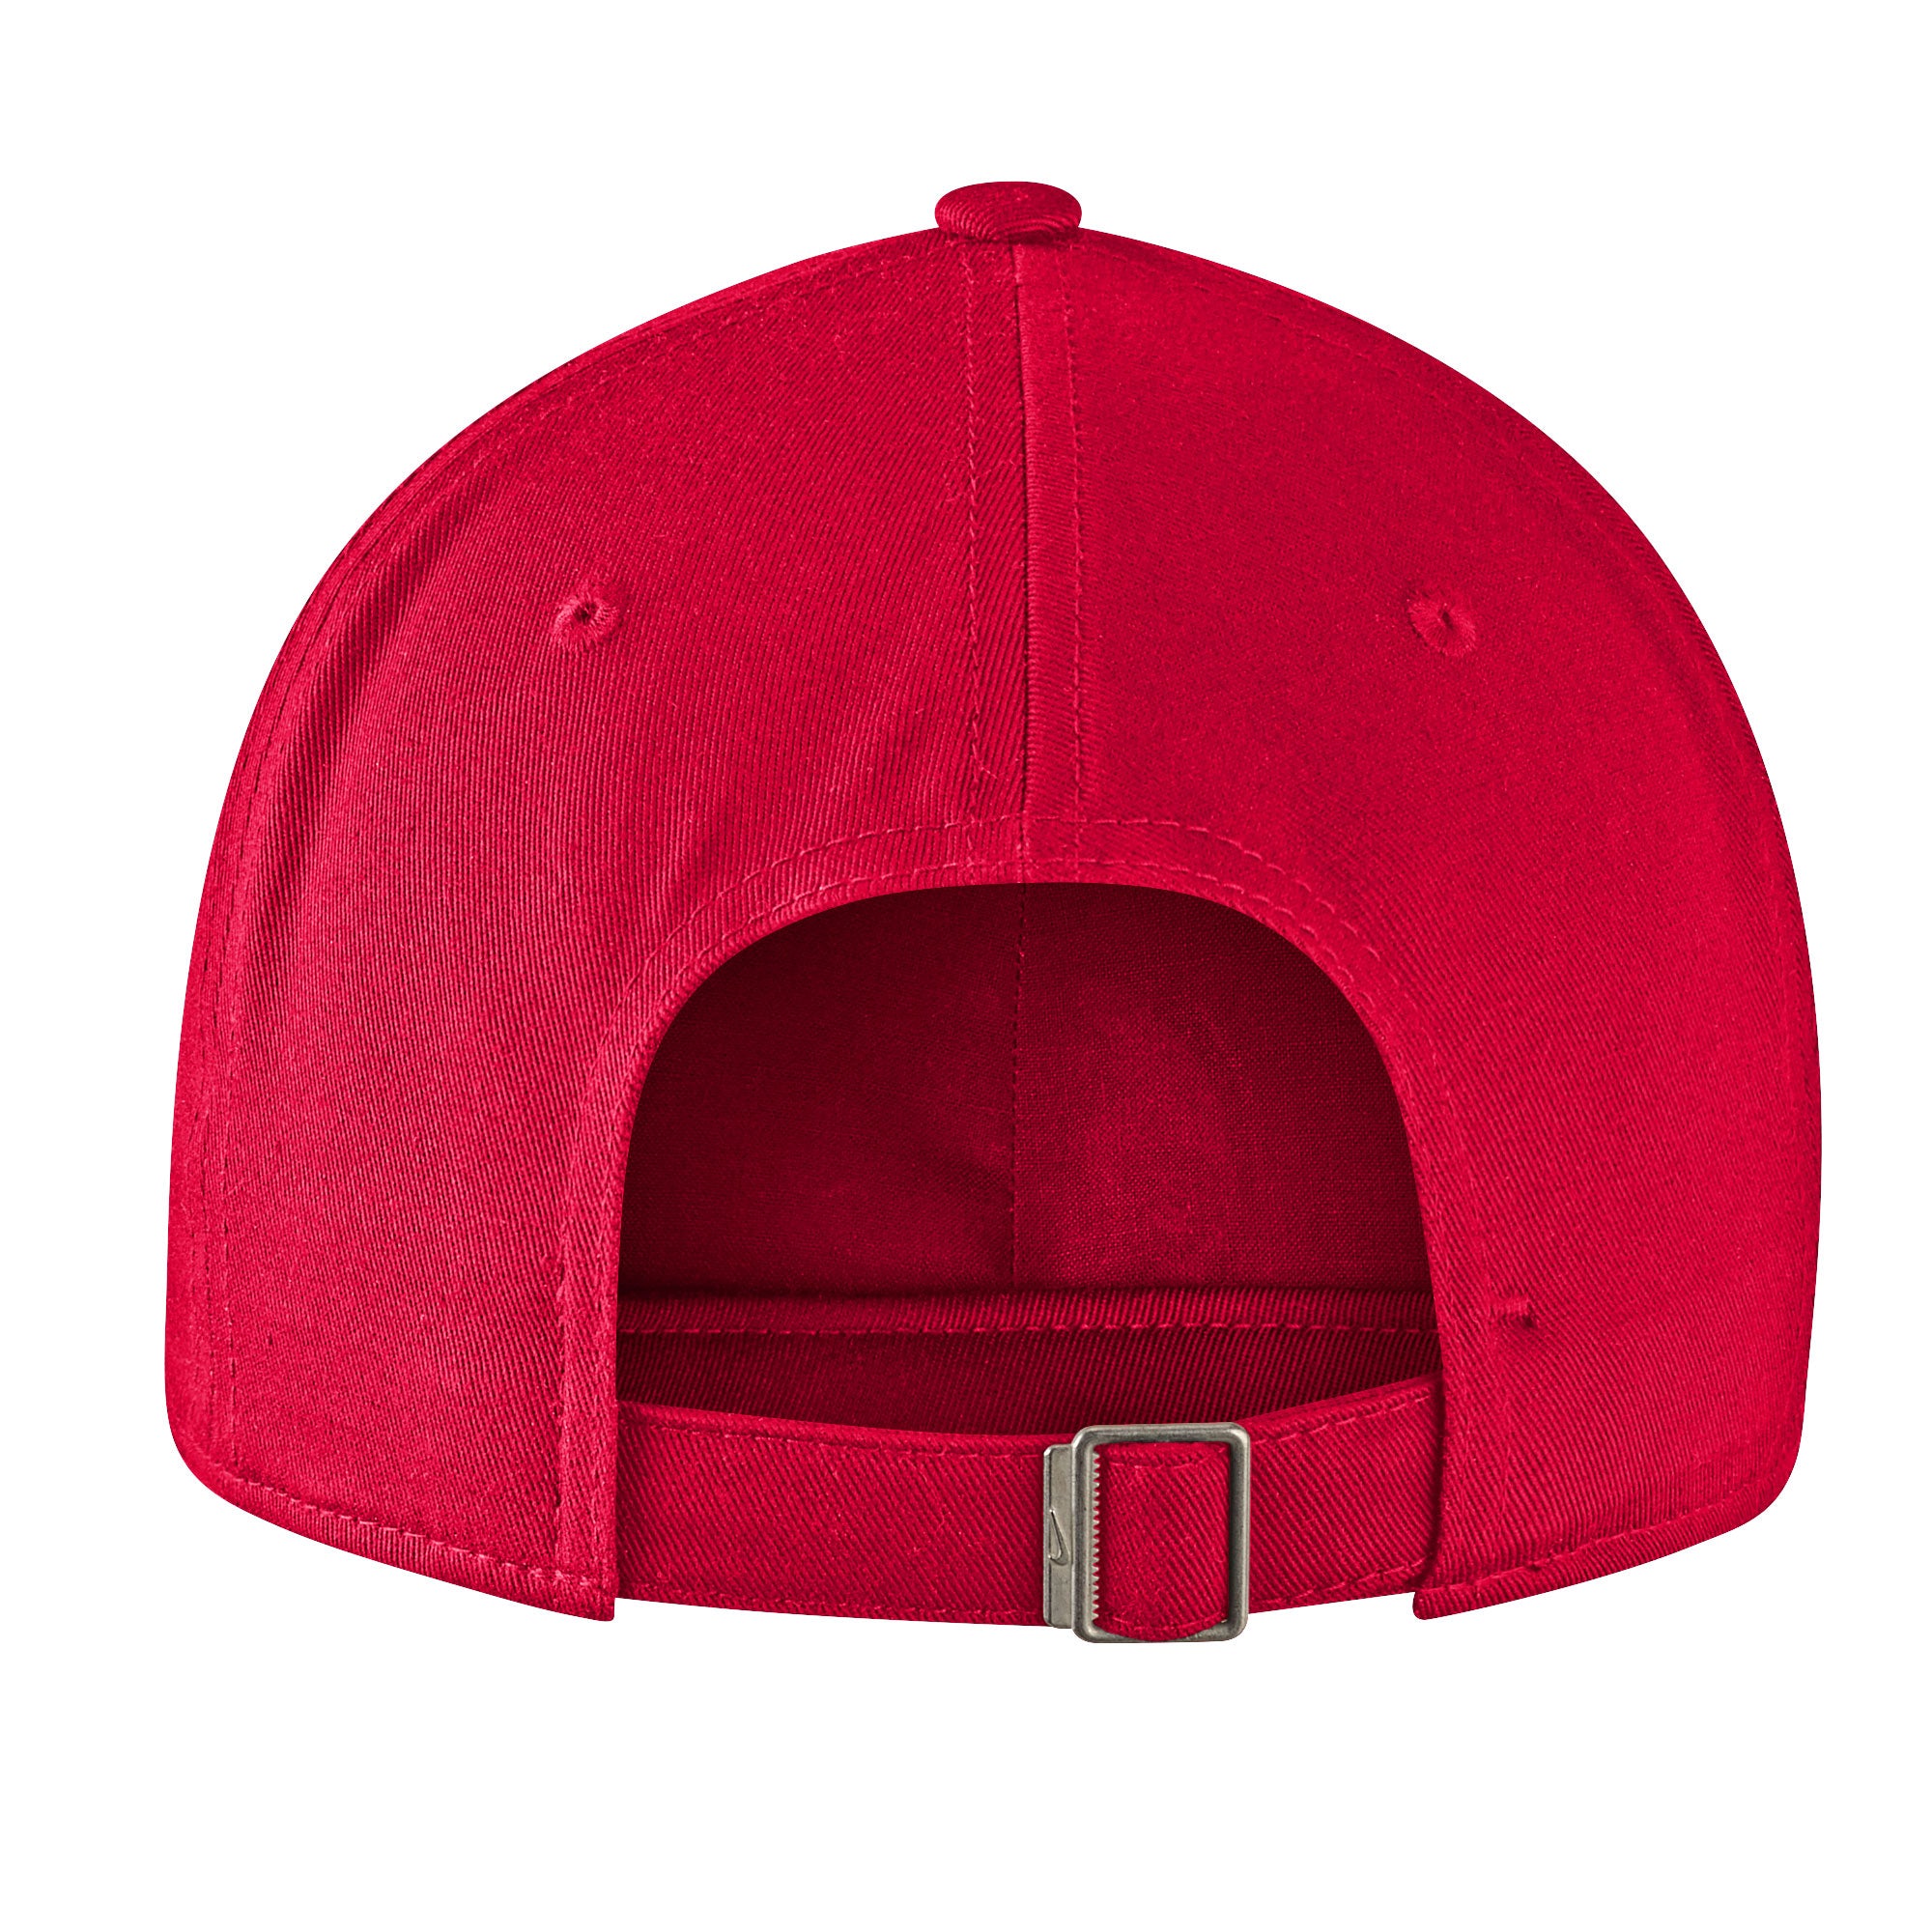 Canada Soccer Mens Heritage Adjustable Hat - RED by Nike | RealSports